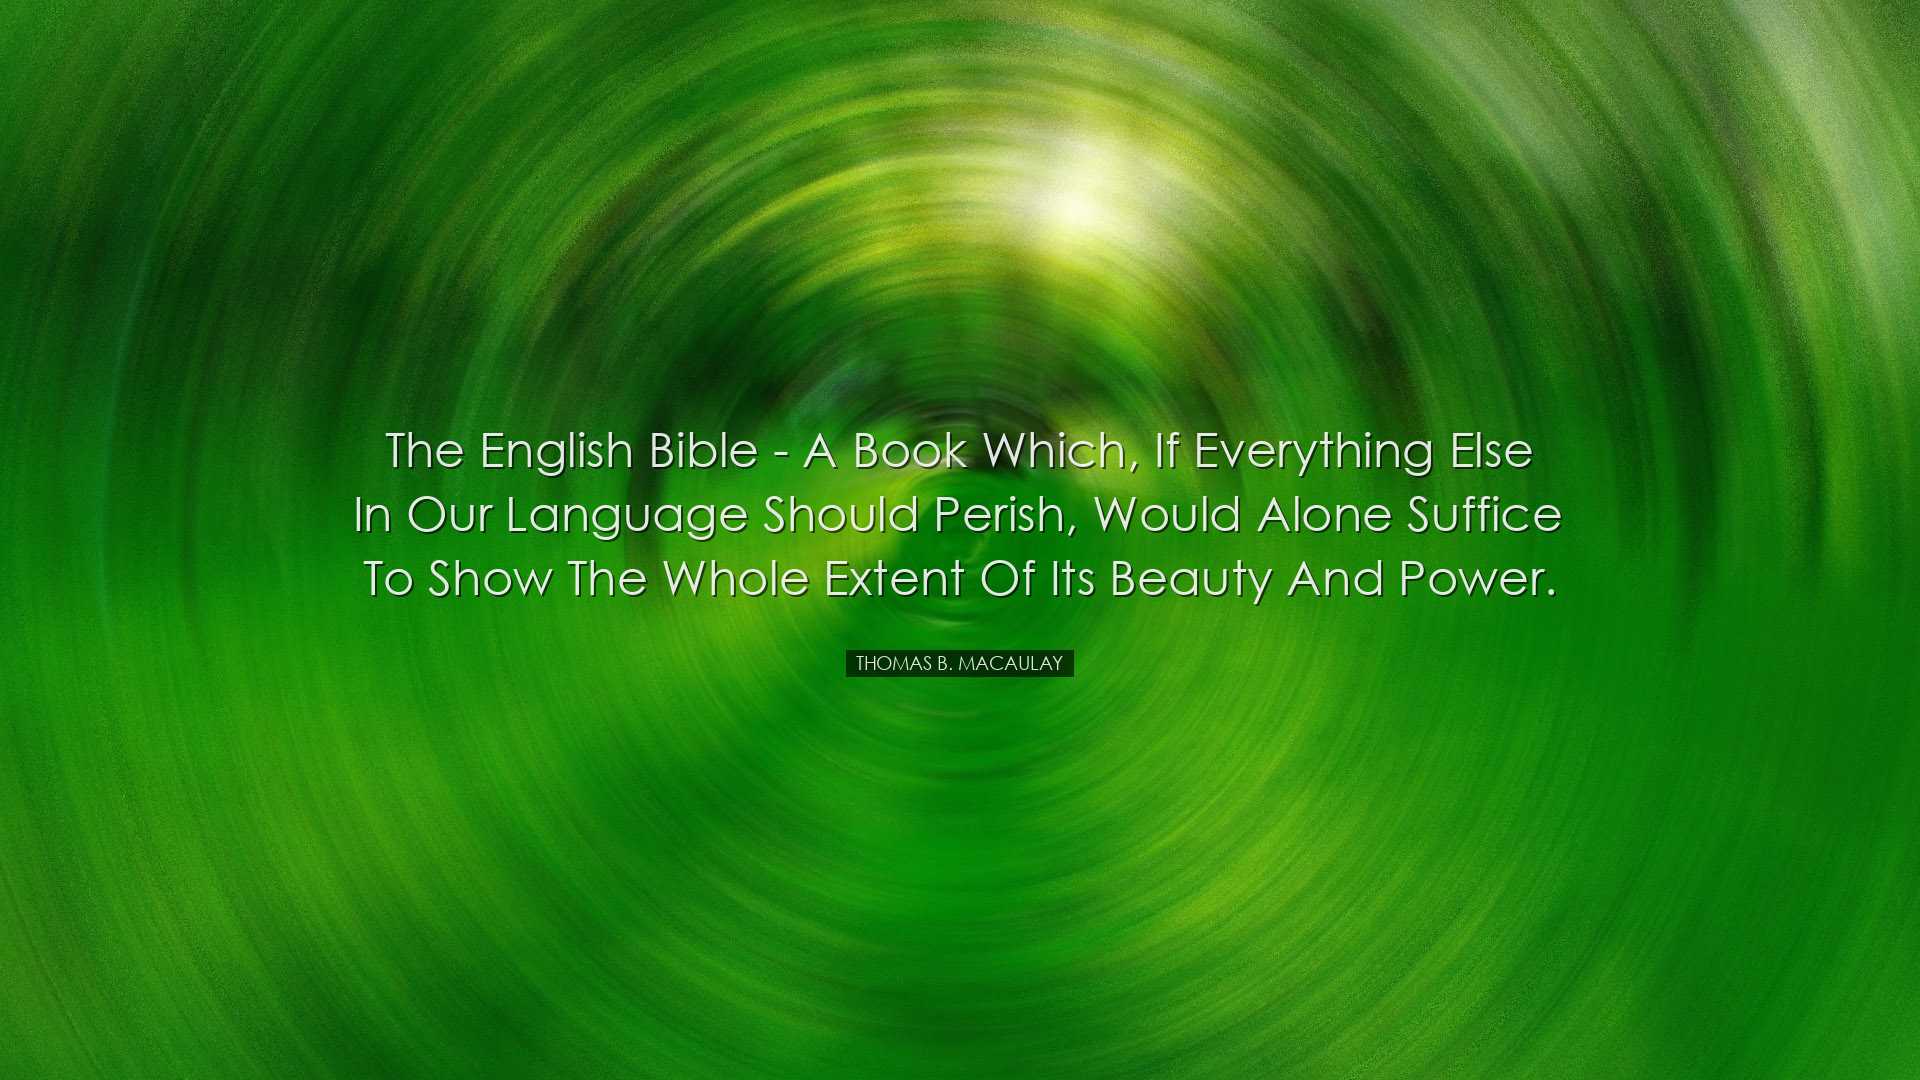 The English Bible - a book which, if everything else in our langua